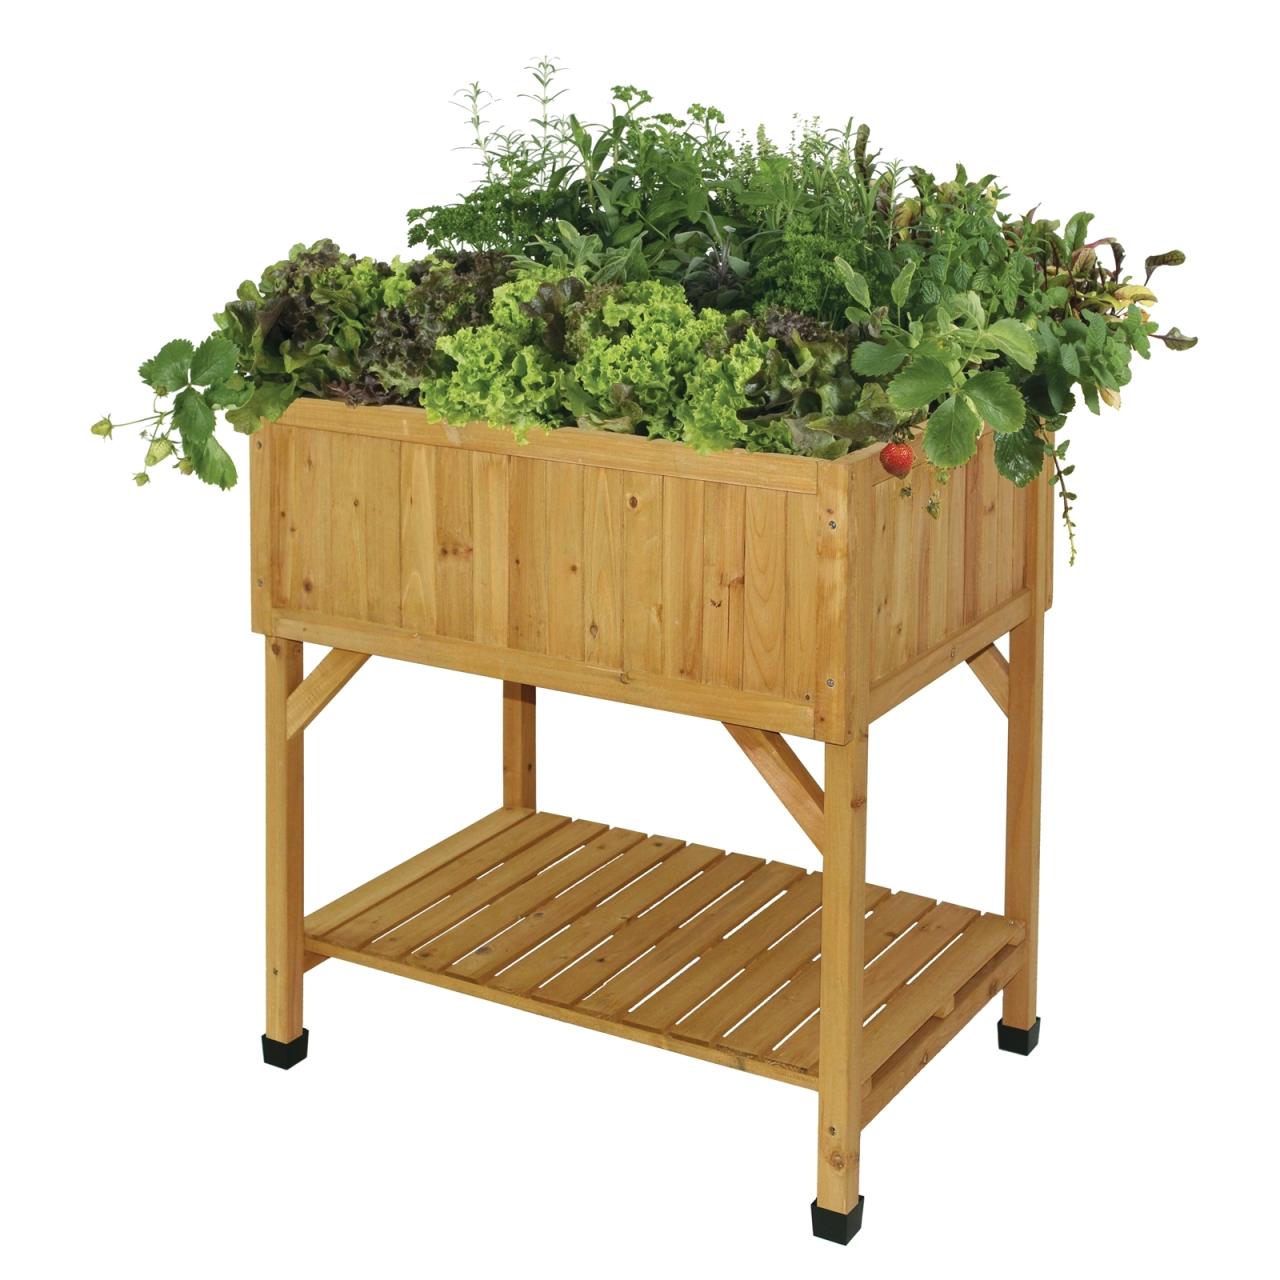 Hanging Plants Indoor | Herb Planter Bunnings: Your Guide to Growing Fresh Herbs at Home